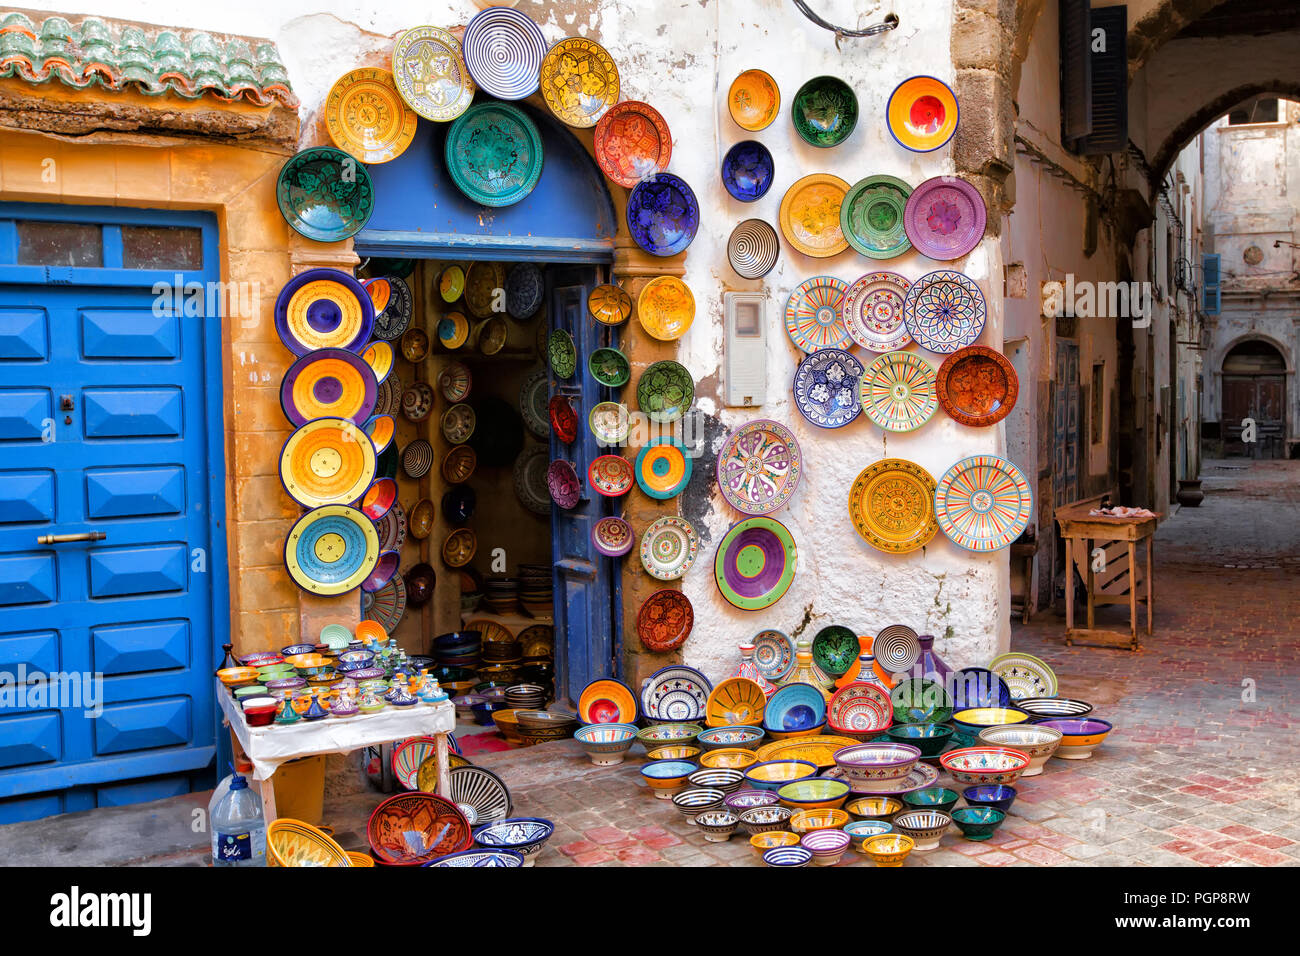 Morocco colorful pottery on display for sale in a picturesque alley. Plates of many colors hang on the walls outside a shop. Location: Essaouira Stock Photo